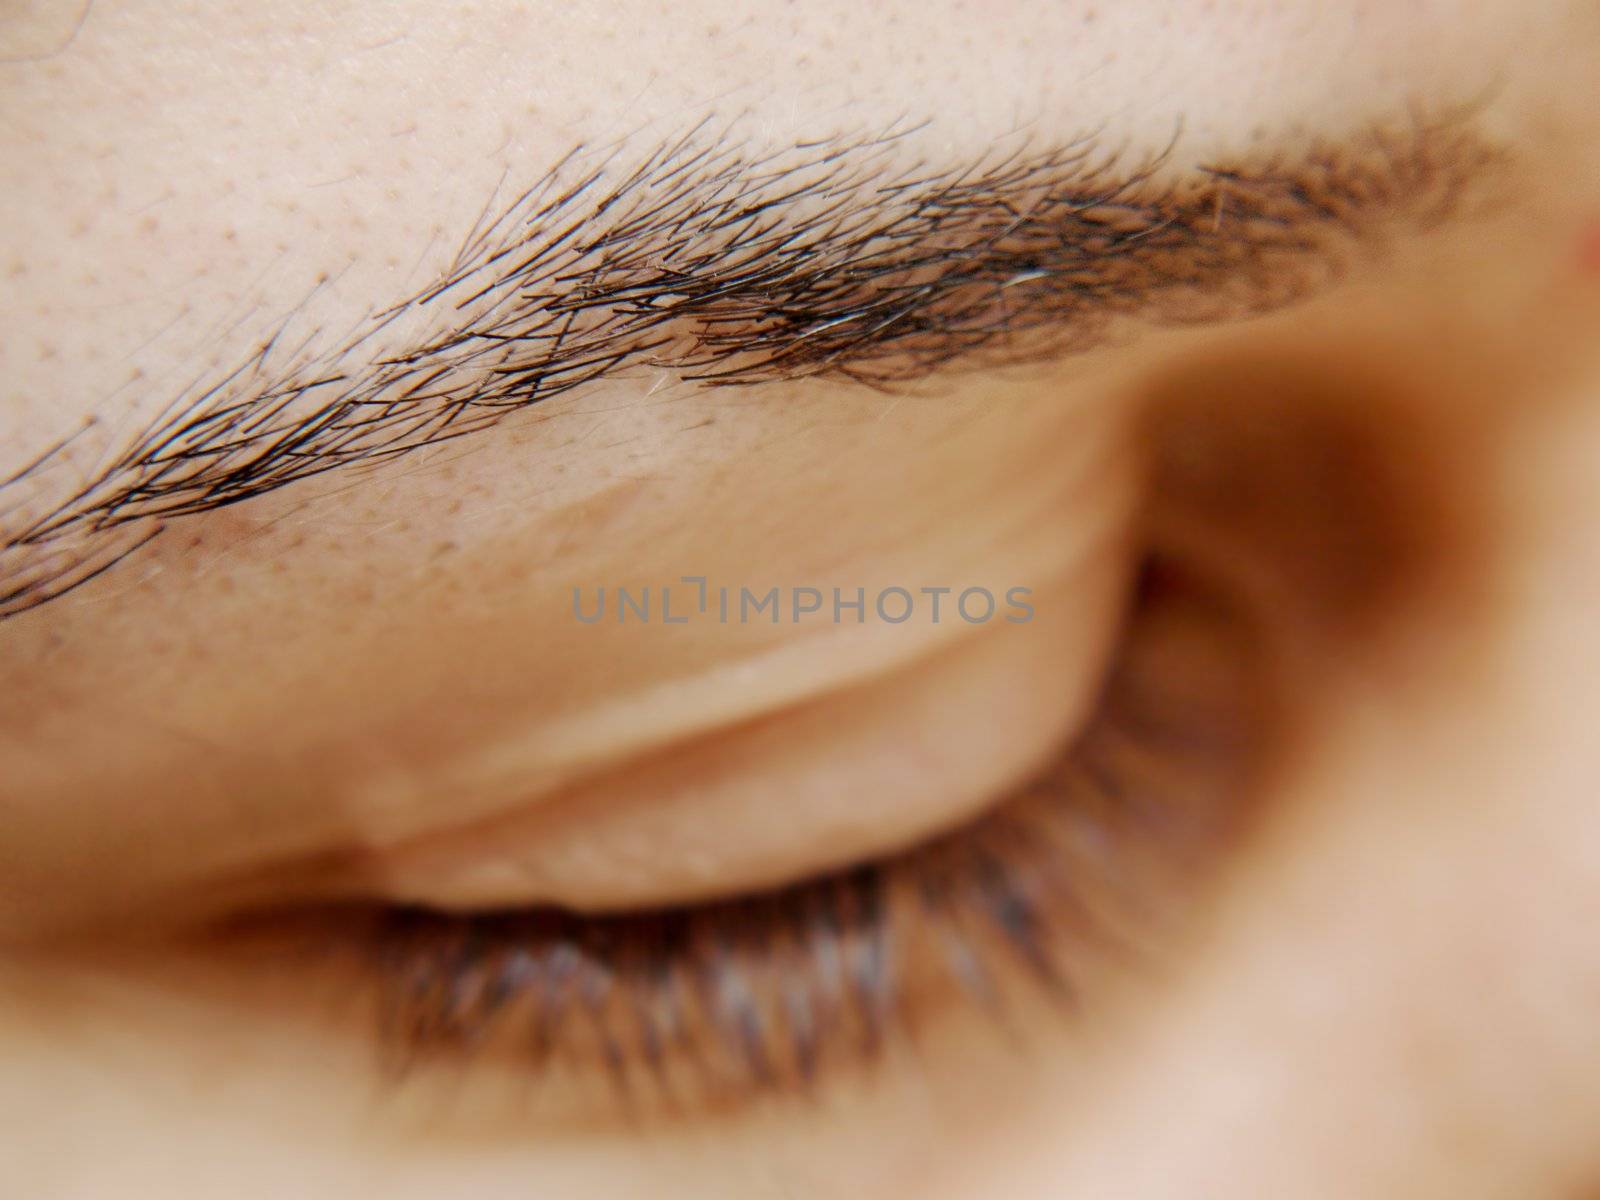 Close up of a womans eye brow